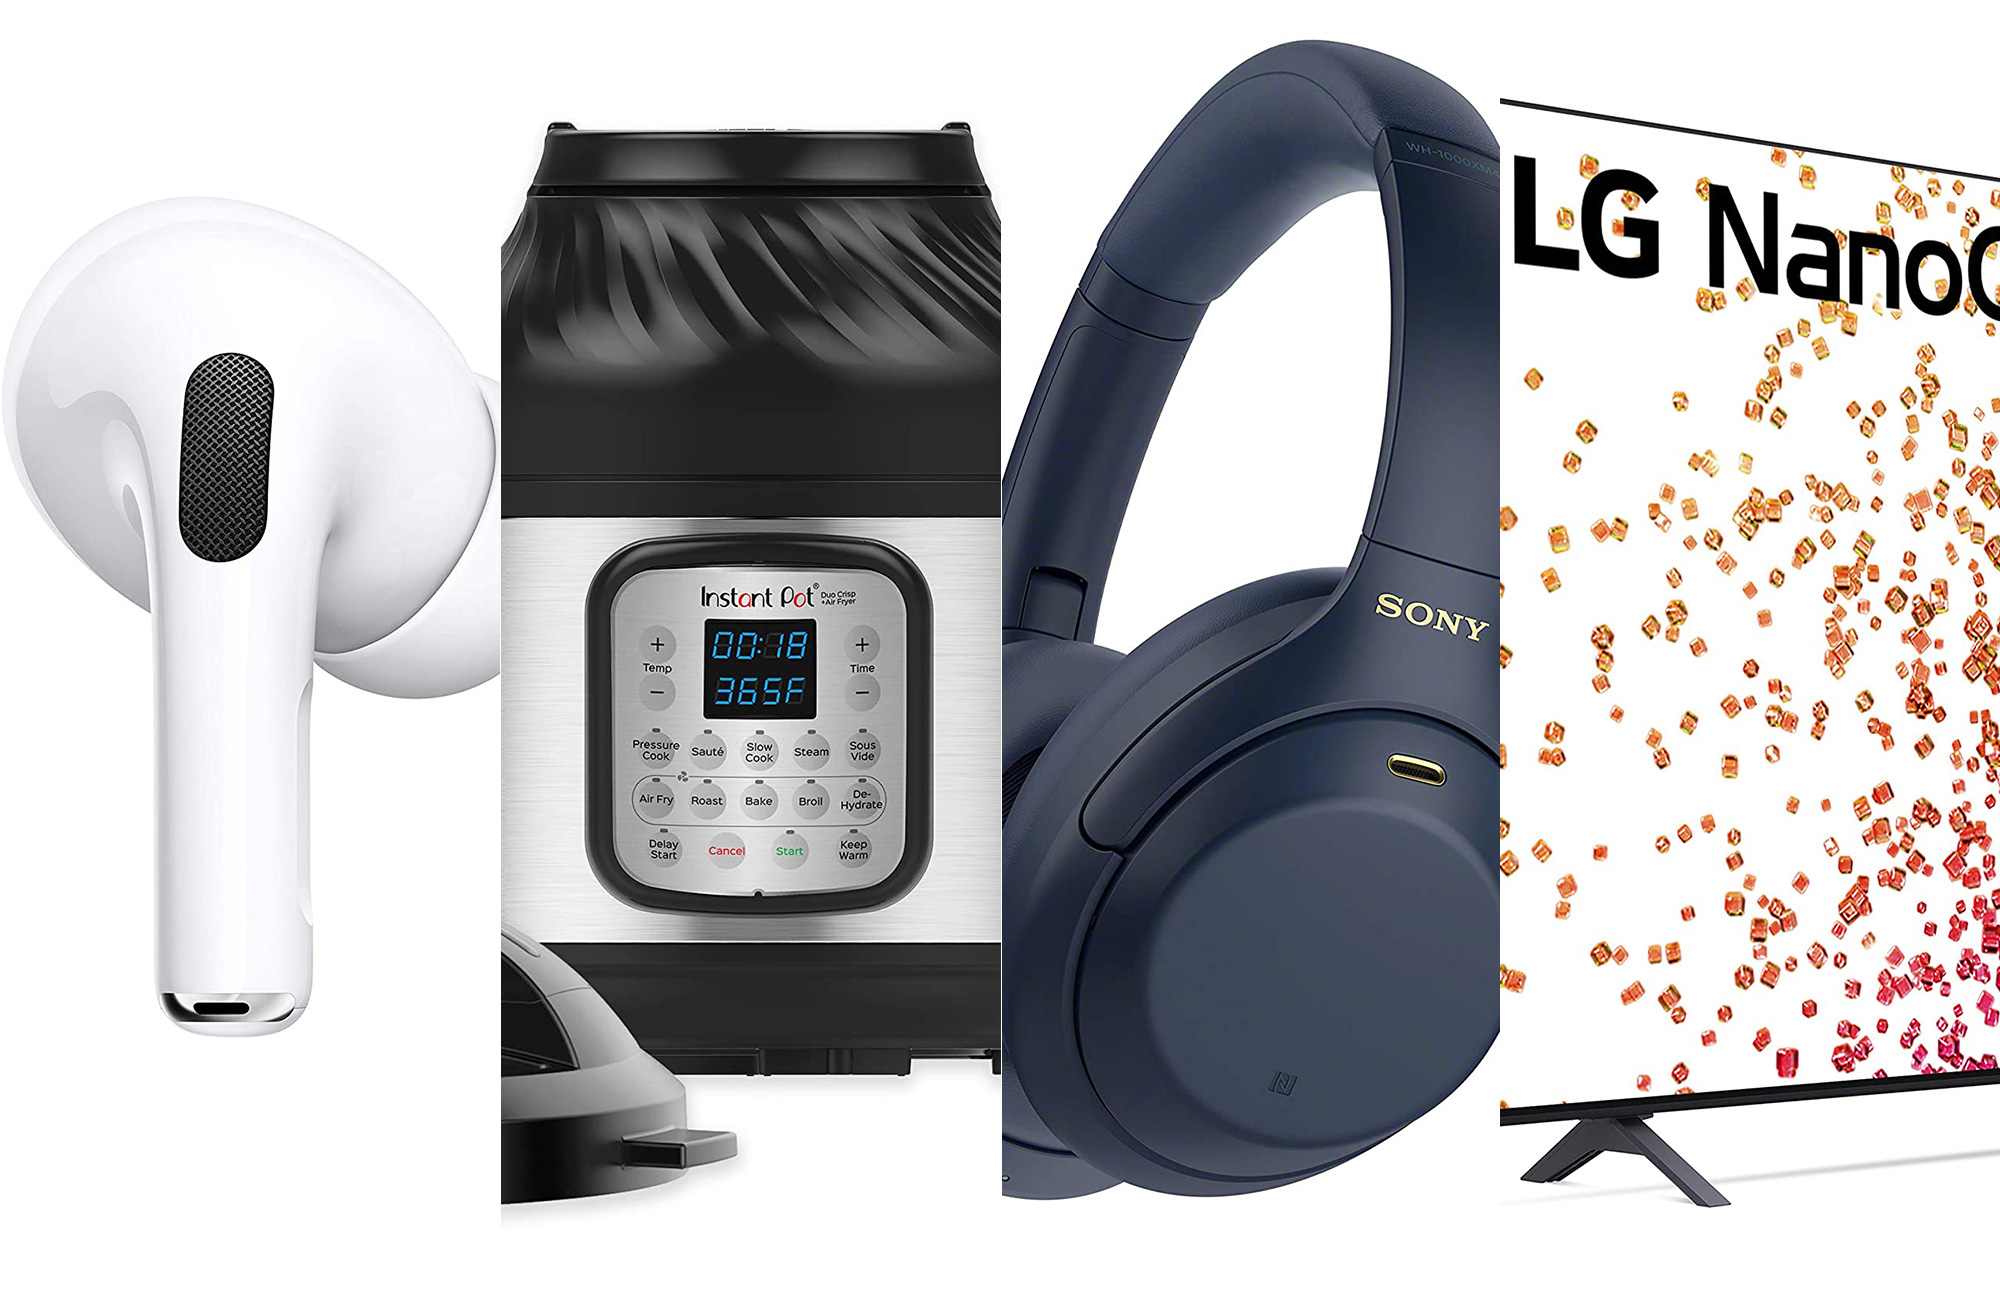 Amazon Black Friday deals: The biggest discounts of the year